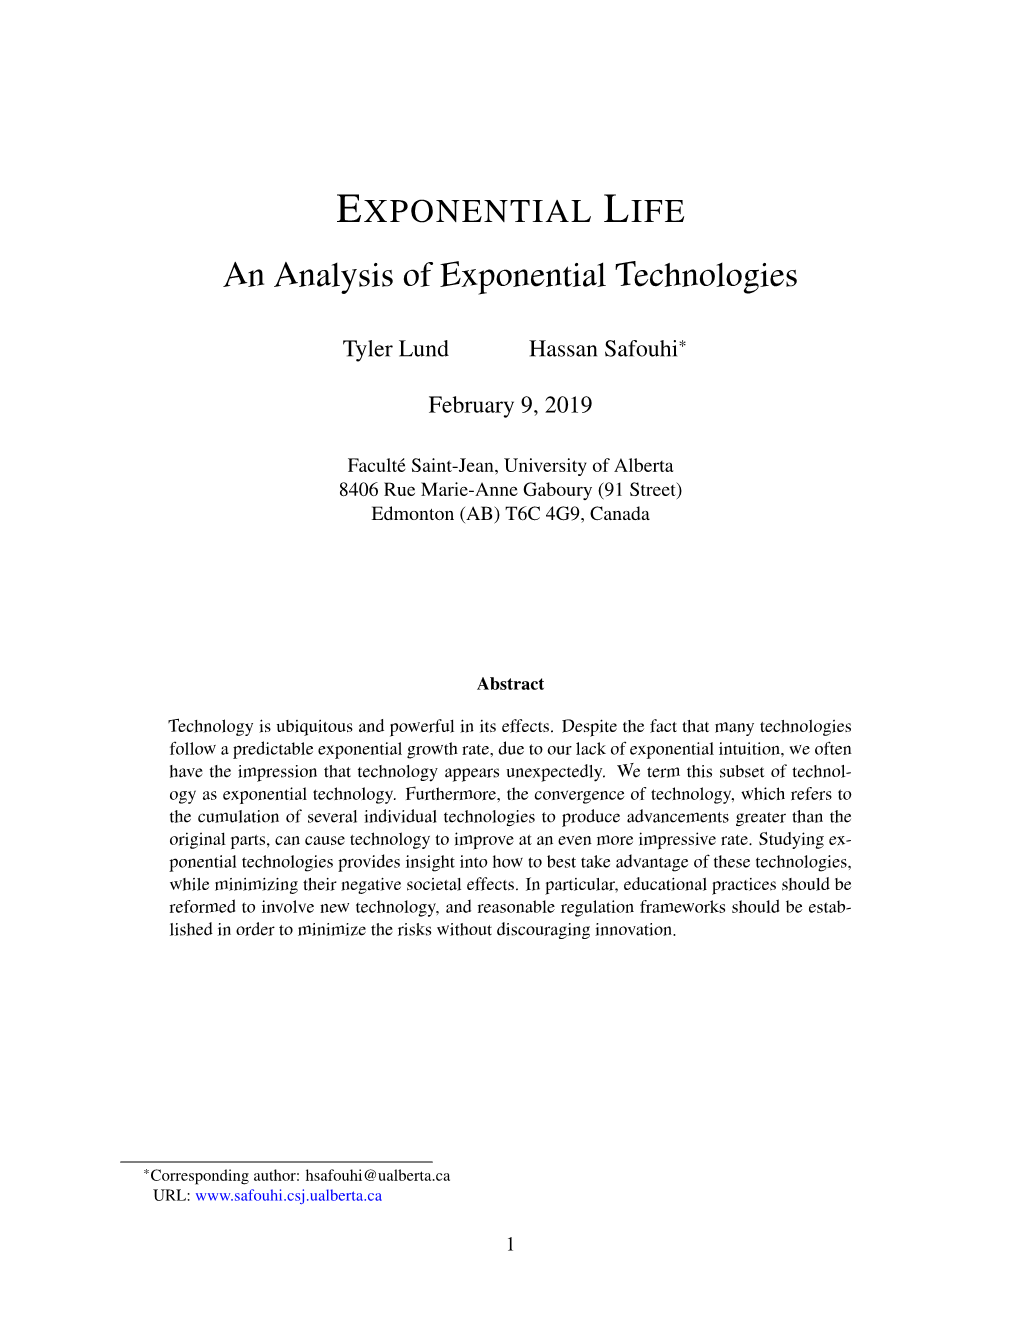 An Analysis of Exponential Technologies